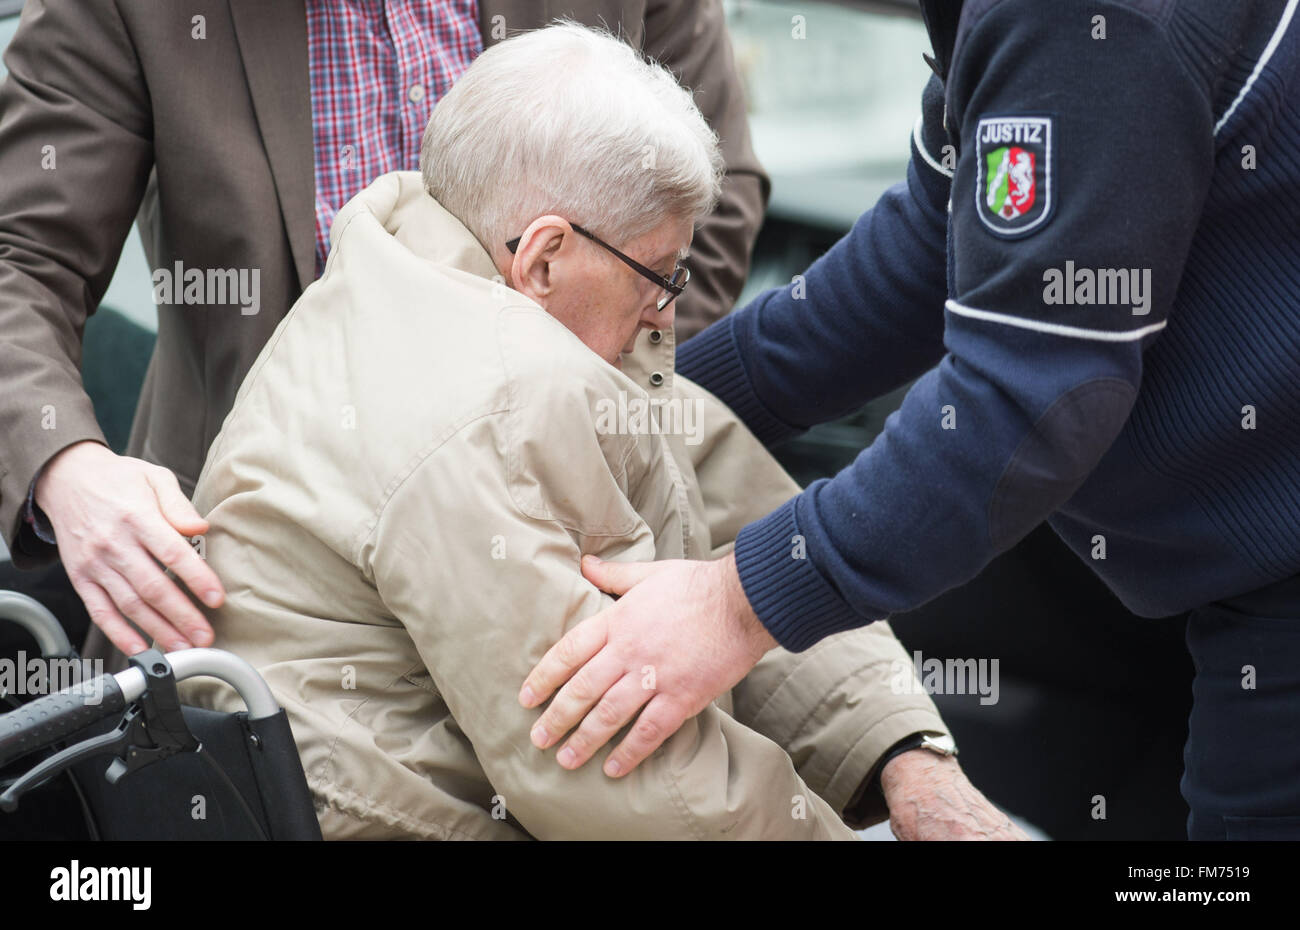 Detmold, Germany. 11th Mar, 2016. Defendant Reinhold Hanning arrives for the continuation of his trial in Detmold, Germany, 11 March 2016. Reinhold Hanning, a 94-year-old World War II SS guard is facing a charge of being an accessory to at least 170,000 murders at Auschwitz concentration camp. Prosecutors state that he was a member of the SS 'Totenkopf' (Death's Head) Division and that he was stationed at the Nazi regime's death camp between early 1943 and June 1944. Photo: Bernd Thissen/dpa/Alamy Live News Stock Photo